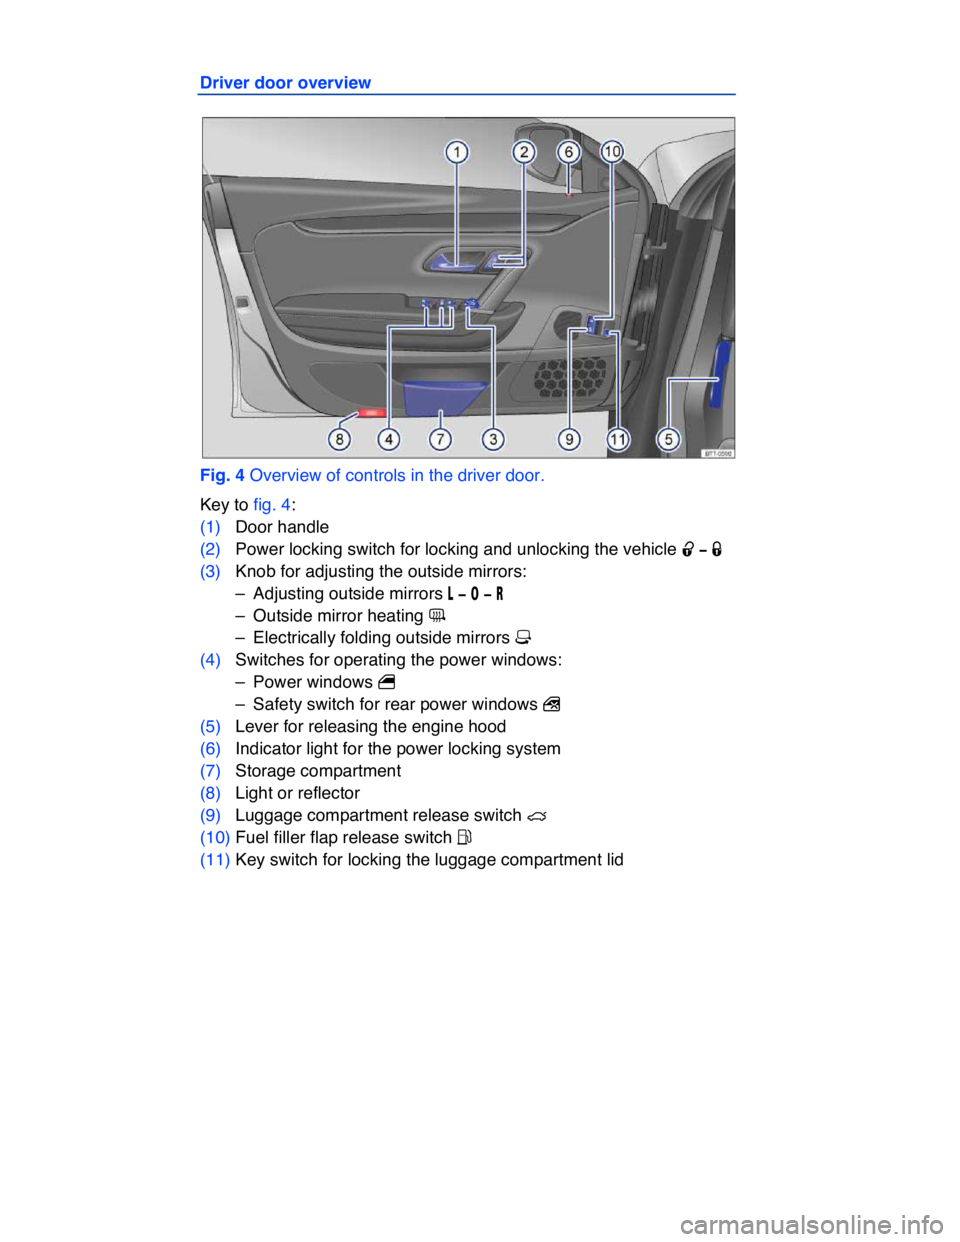 VOLKSWAGEN CC 2012  Owners Manual  
Driver door overview 
 
Fig. 4 Overview of controls in the driver door. 
Key to fig. 4: 
(1) Door handle  
(2) Power locking switch for locking and unlocking the vehicle �0 �